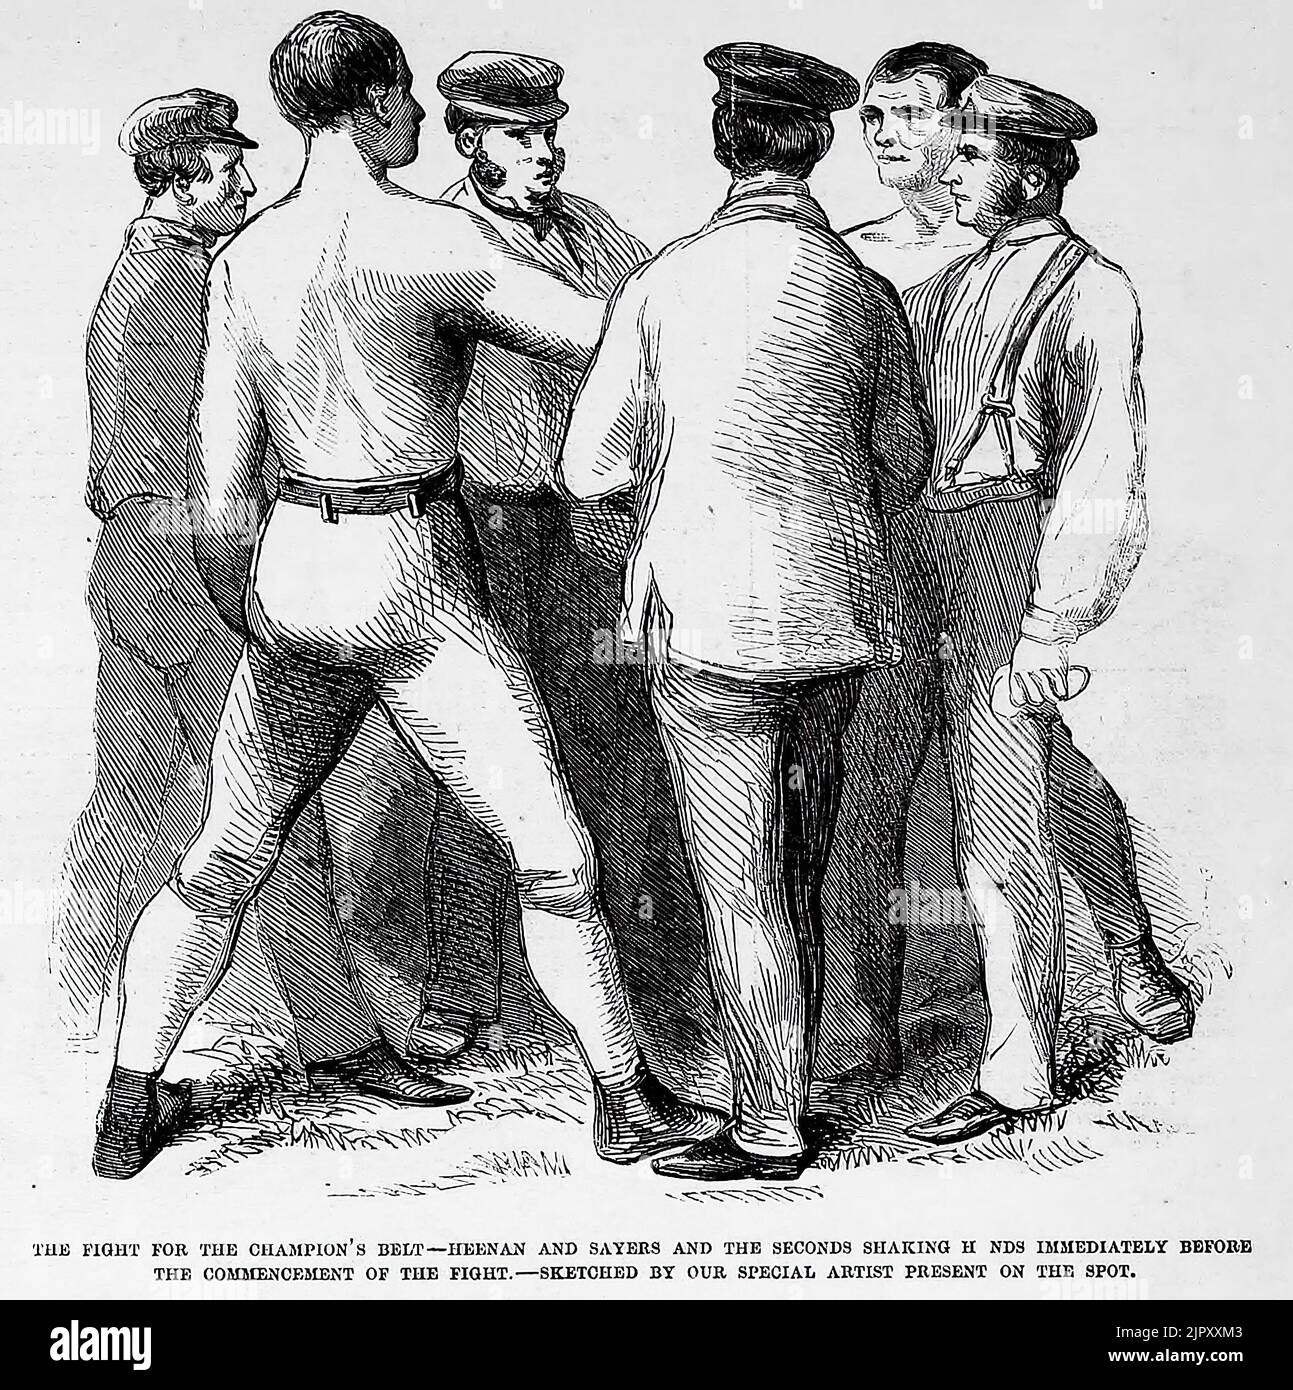 The fight for the Champion's Belt - John C. Heenan and Tom Sayers and the seconds shaking hands immediately before the commencement of the fight, April 17th, 1860. 19th century illustration from Frank Leslie's Illustrated Newspaper Stock Photo